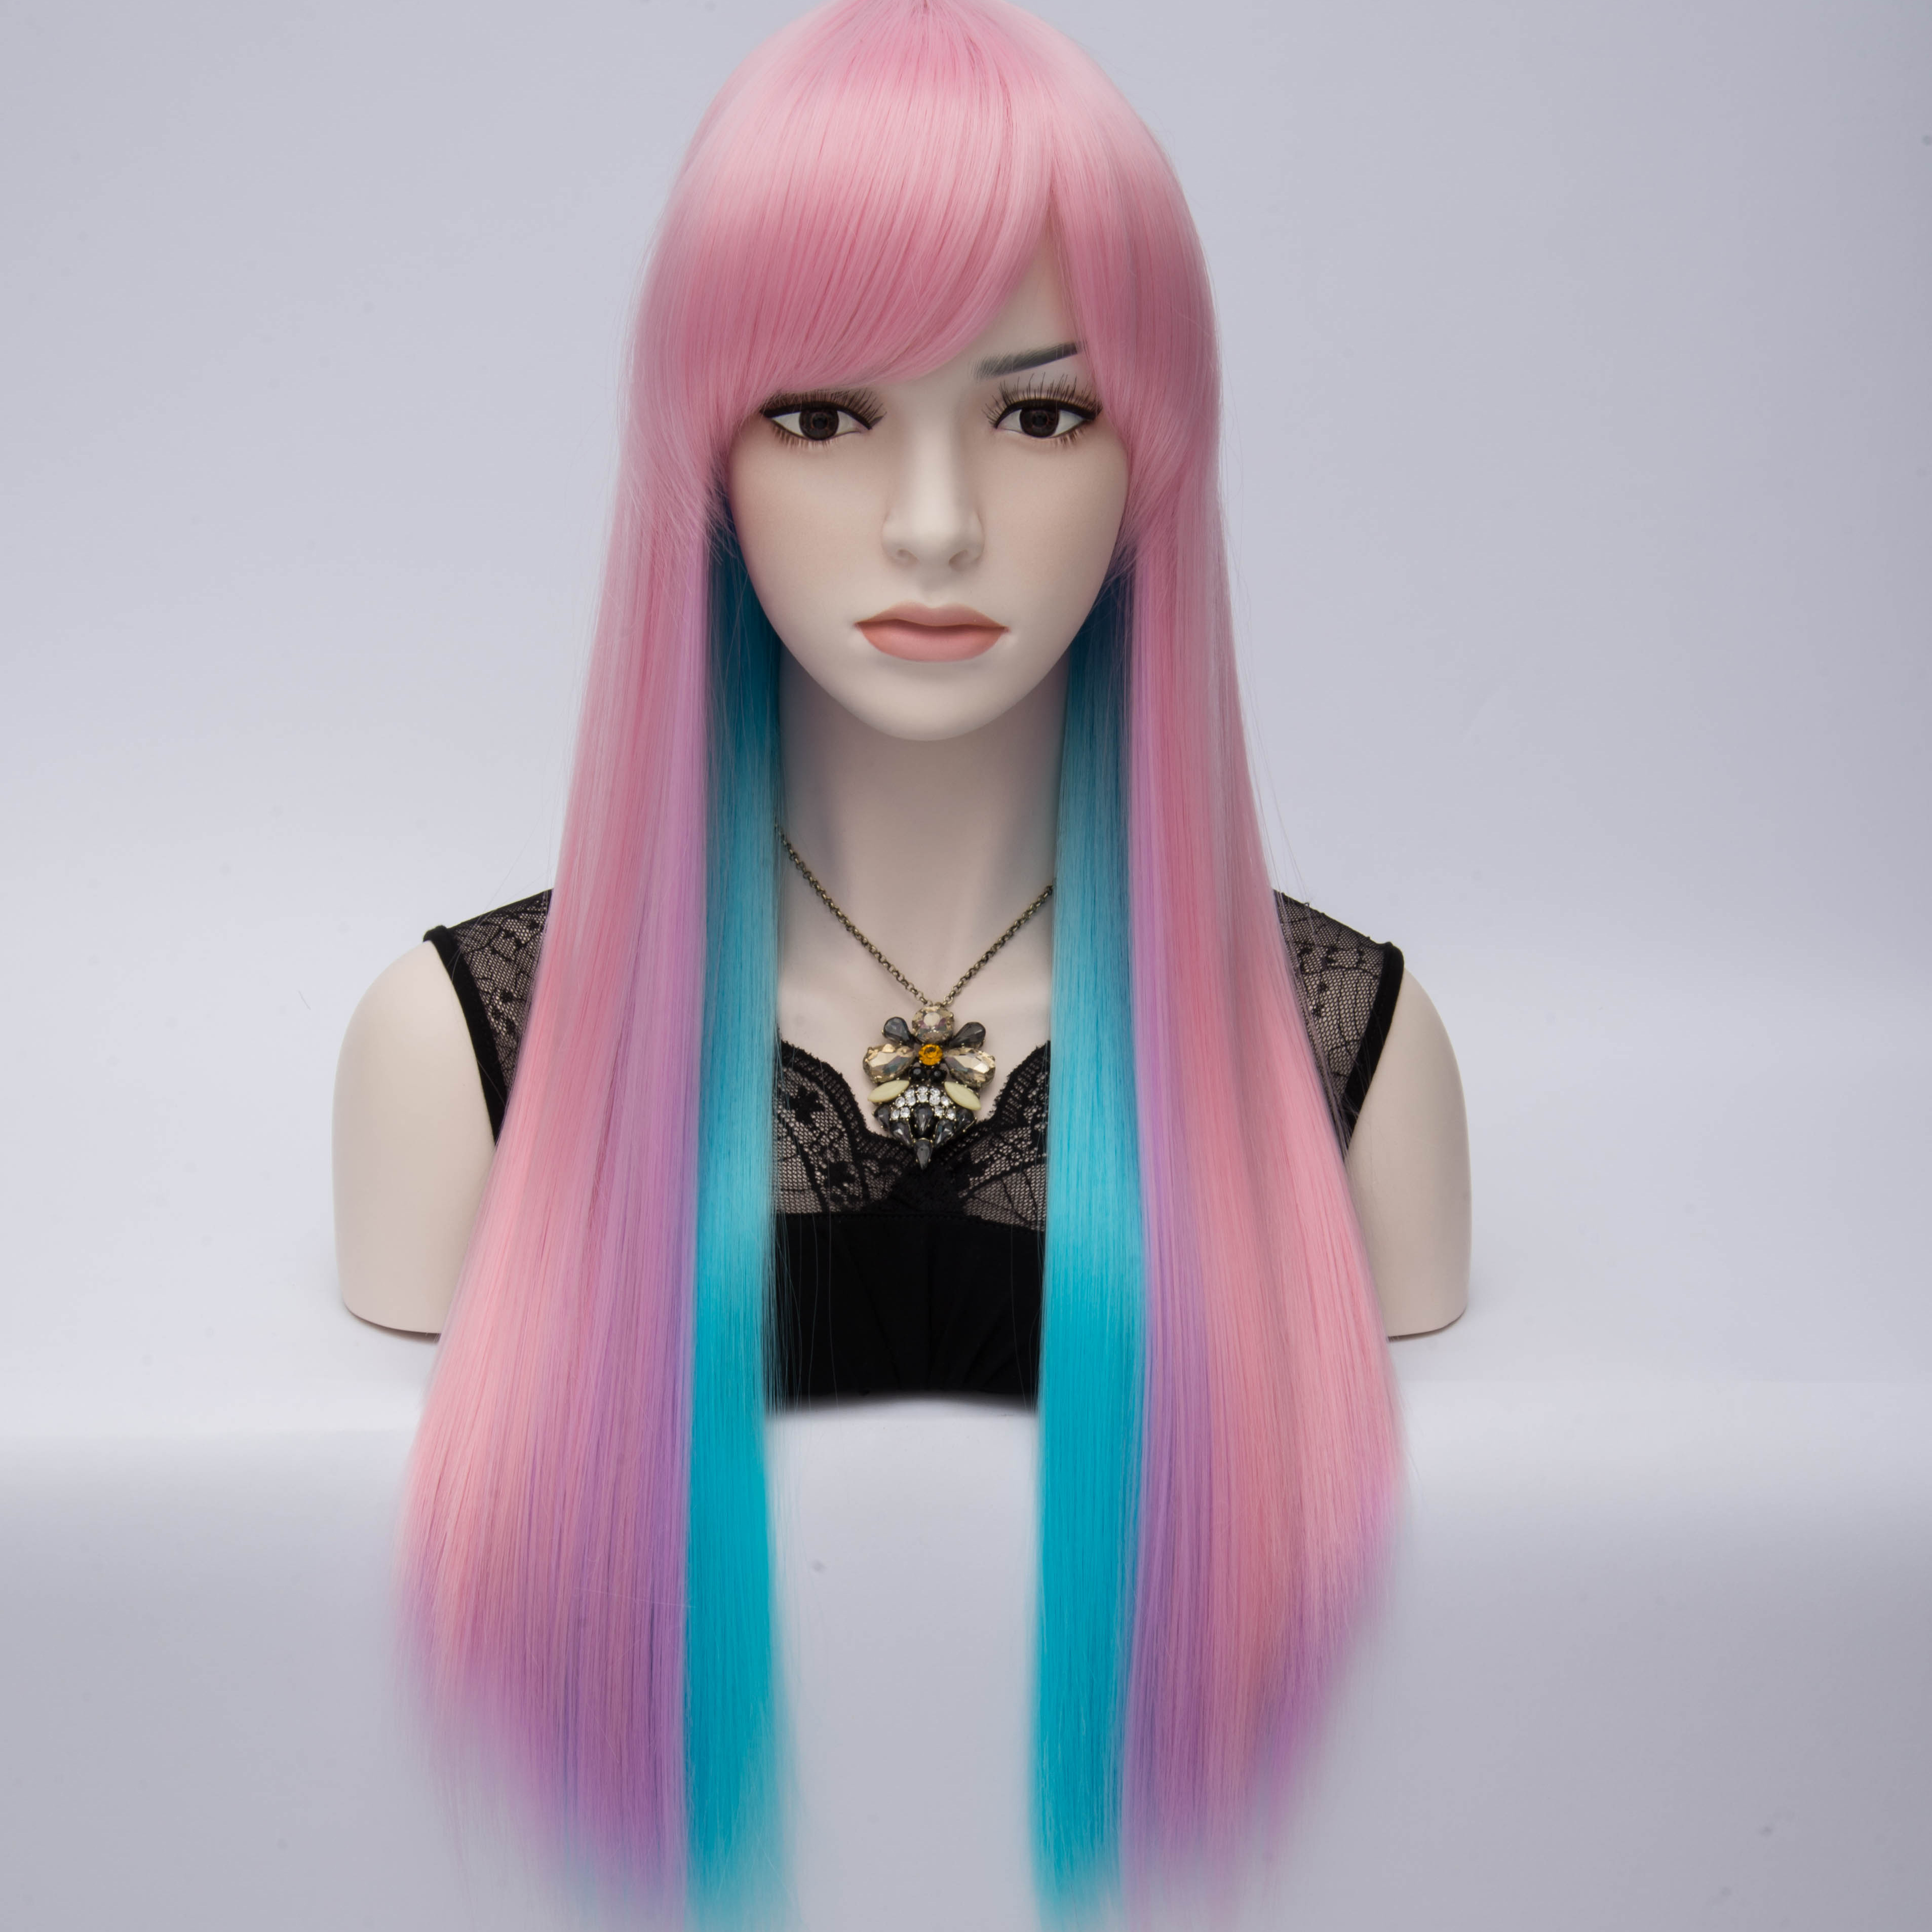 Club Party Rainbow Long Straight Women's Cosplay Wig 28 Inches